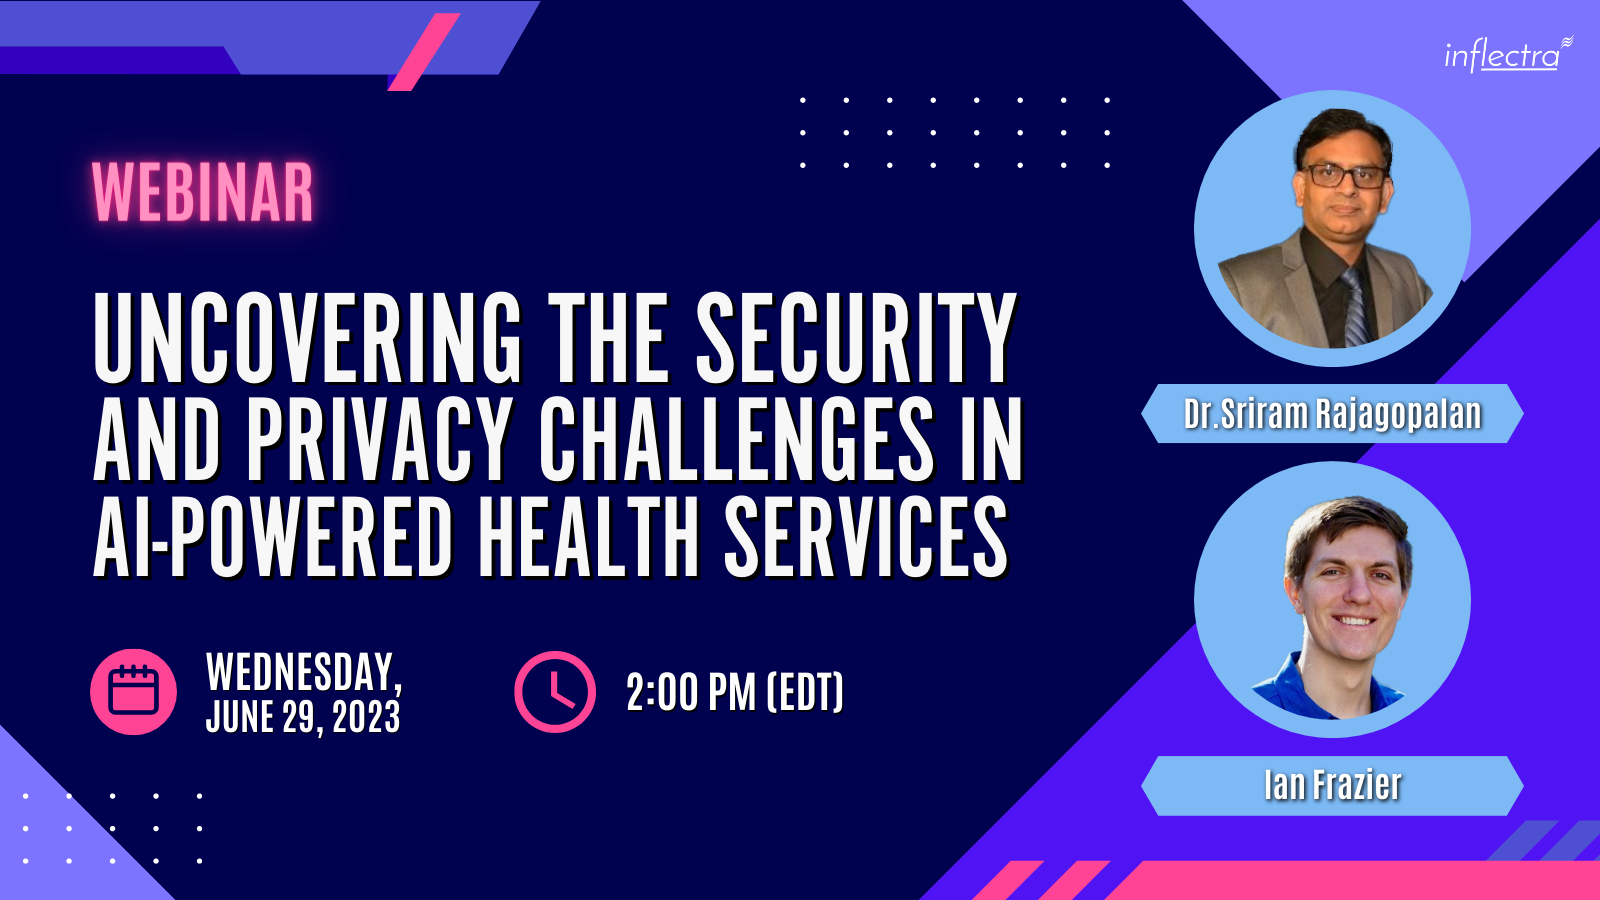 webinar-uncovering-the-security-and-privacy-challenges-in-ai-powered-health-services-image